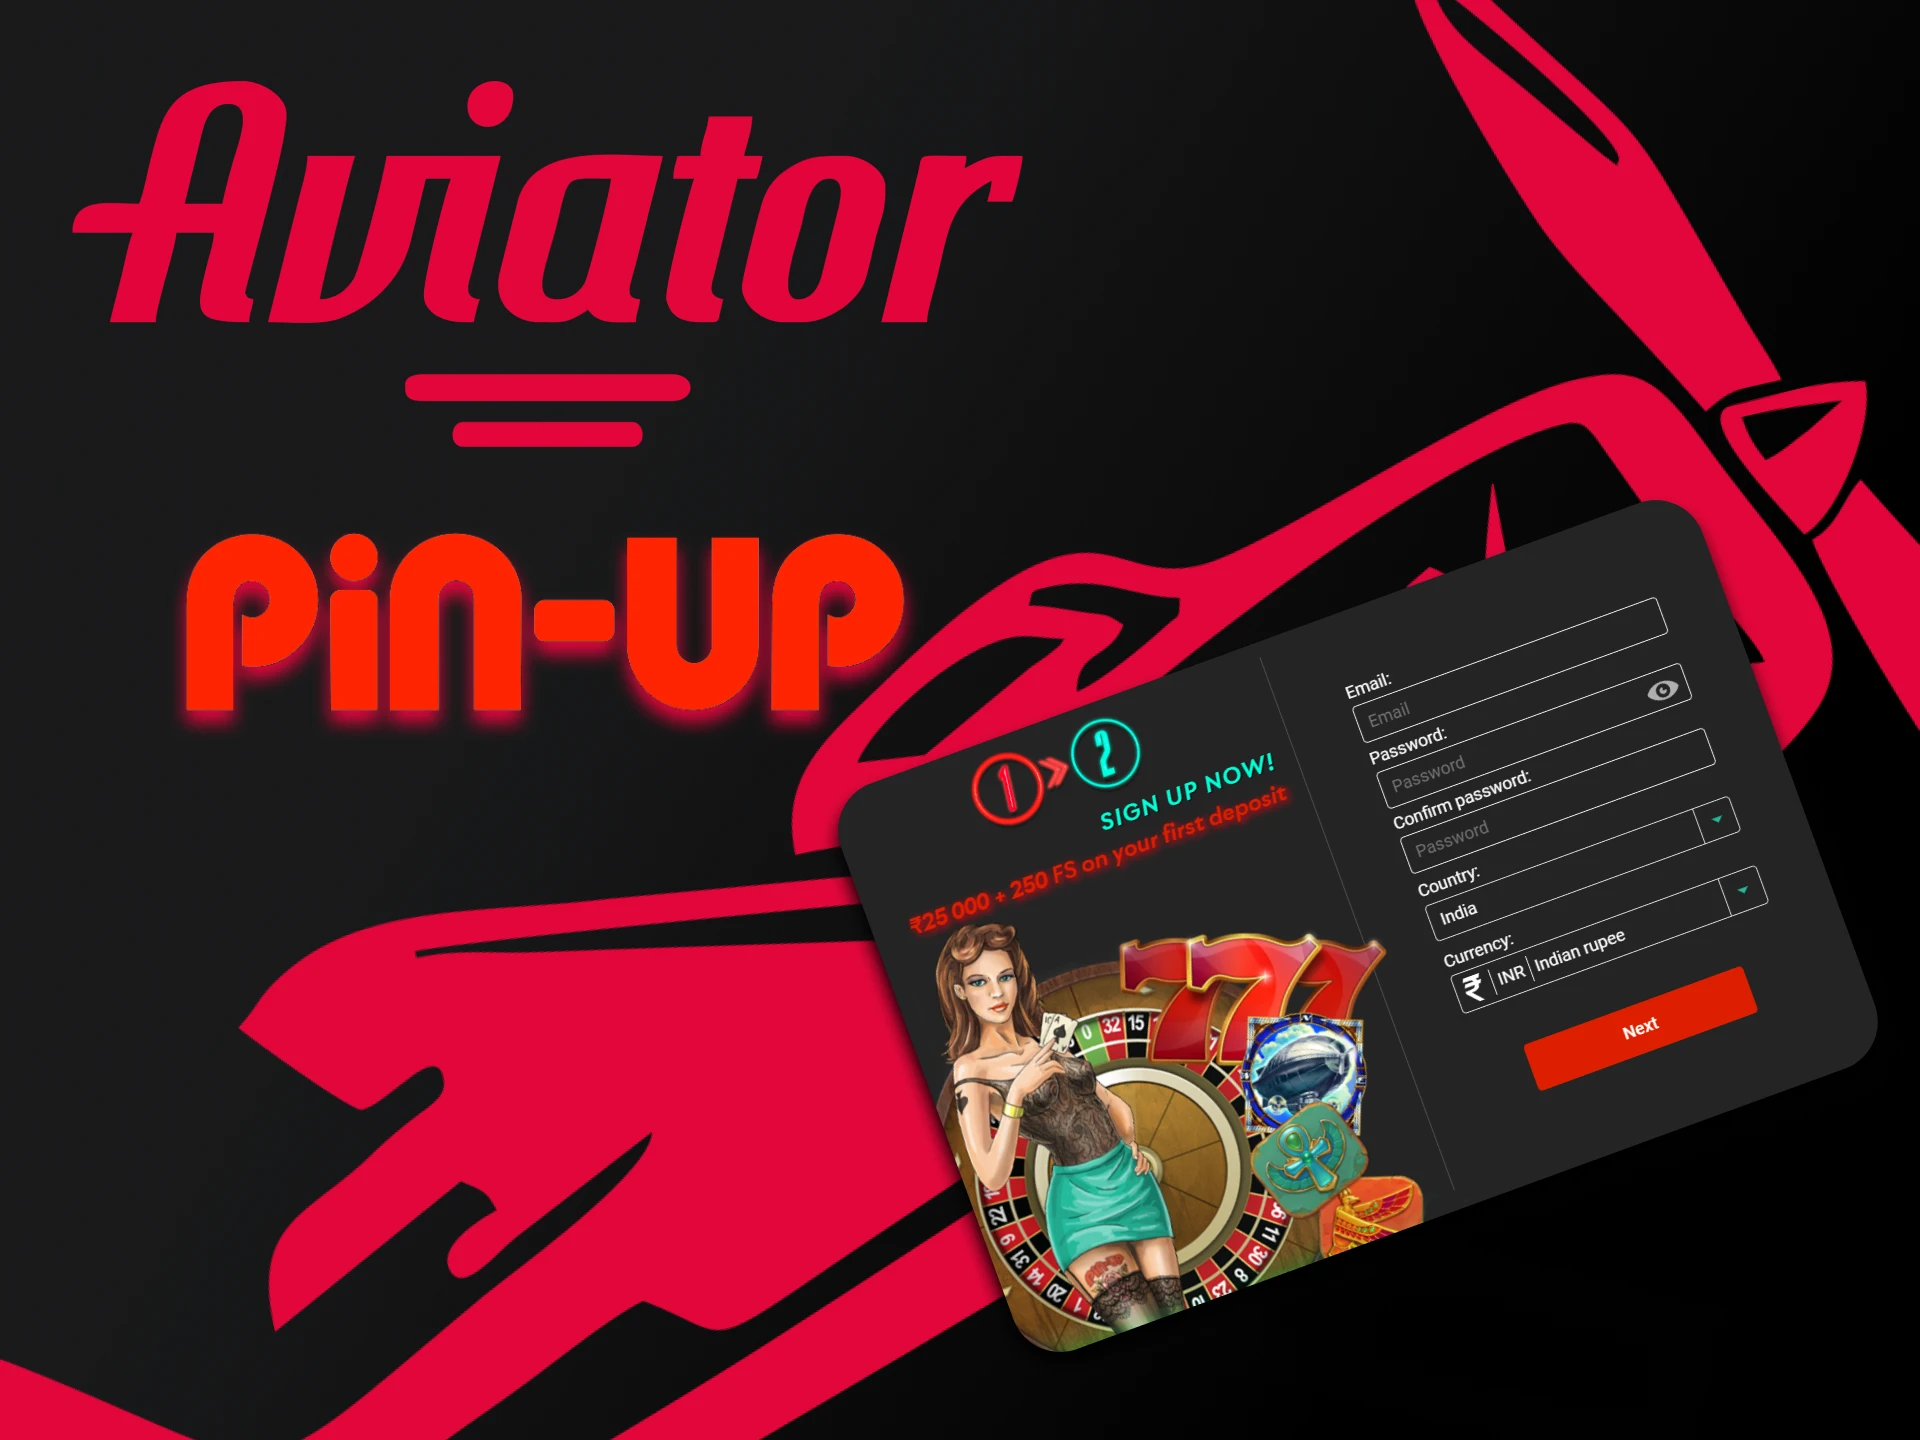 Go through the registration process on Pin Up to play Aviator.